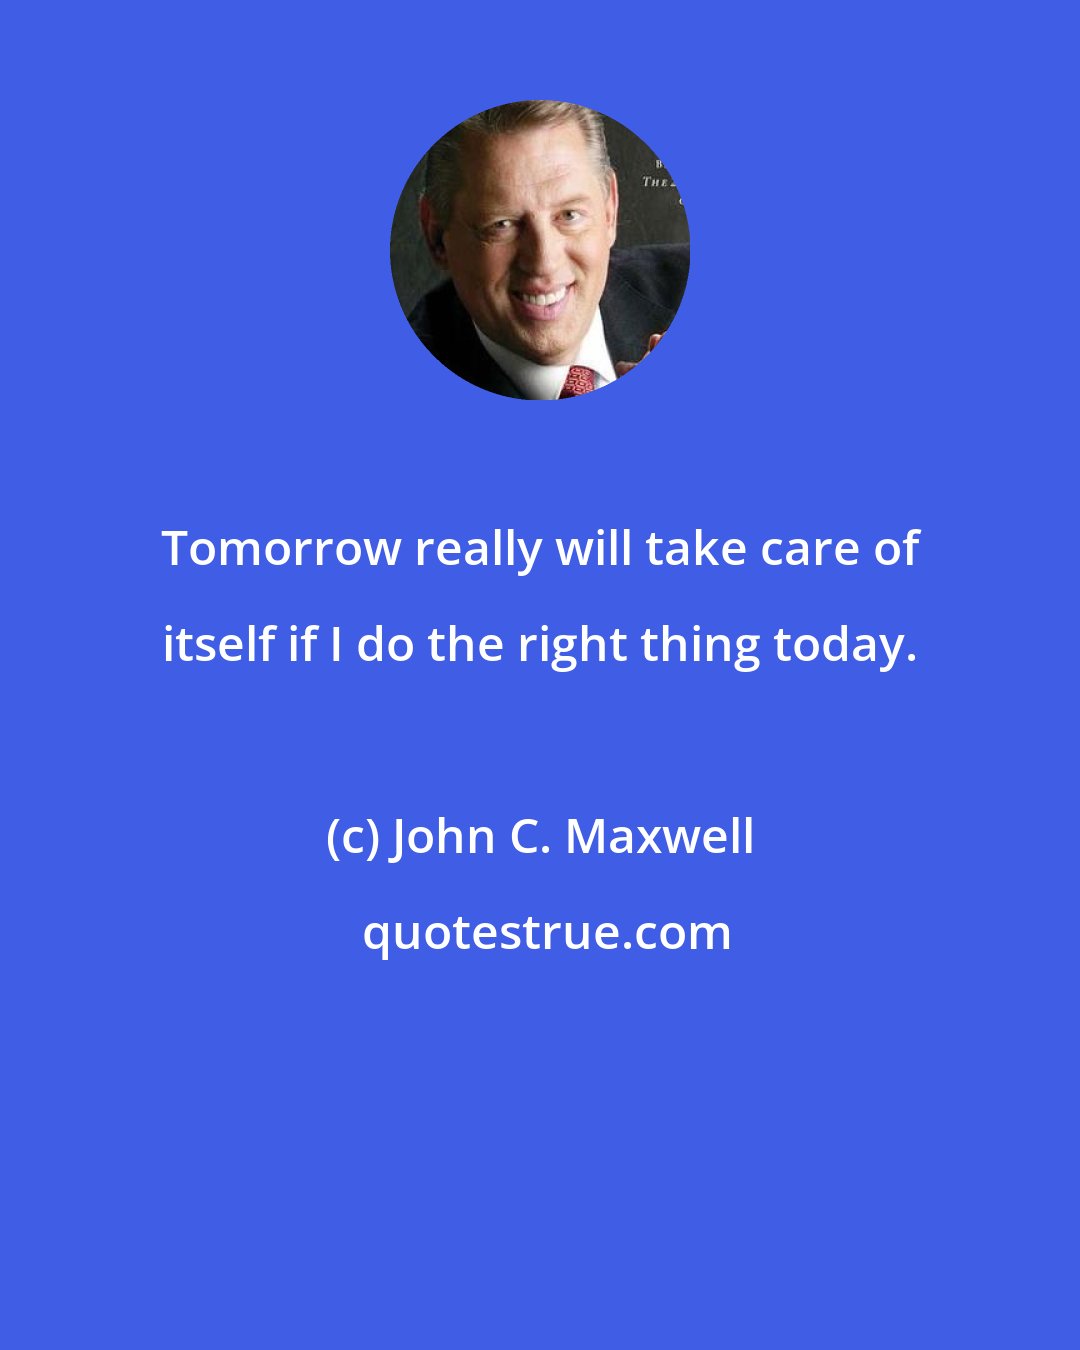 John C. Maxwell: Tomorrow really will take care of itself if I do the right thing today.